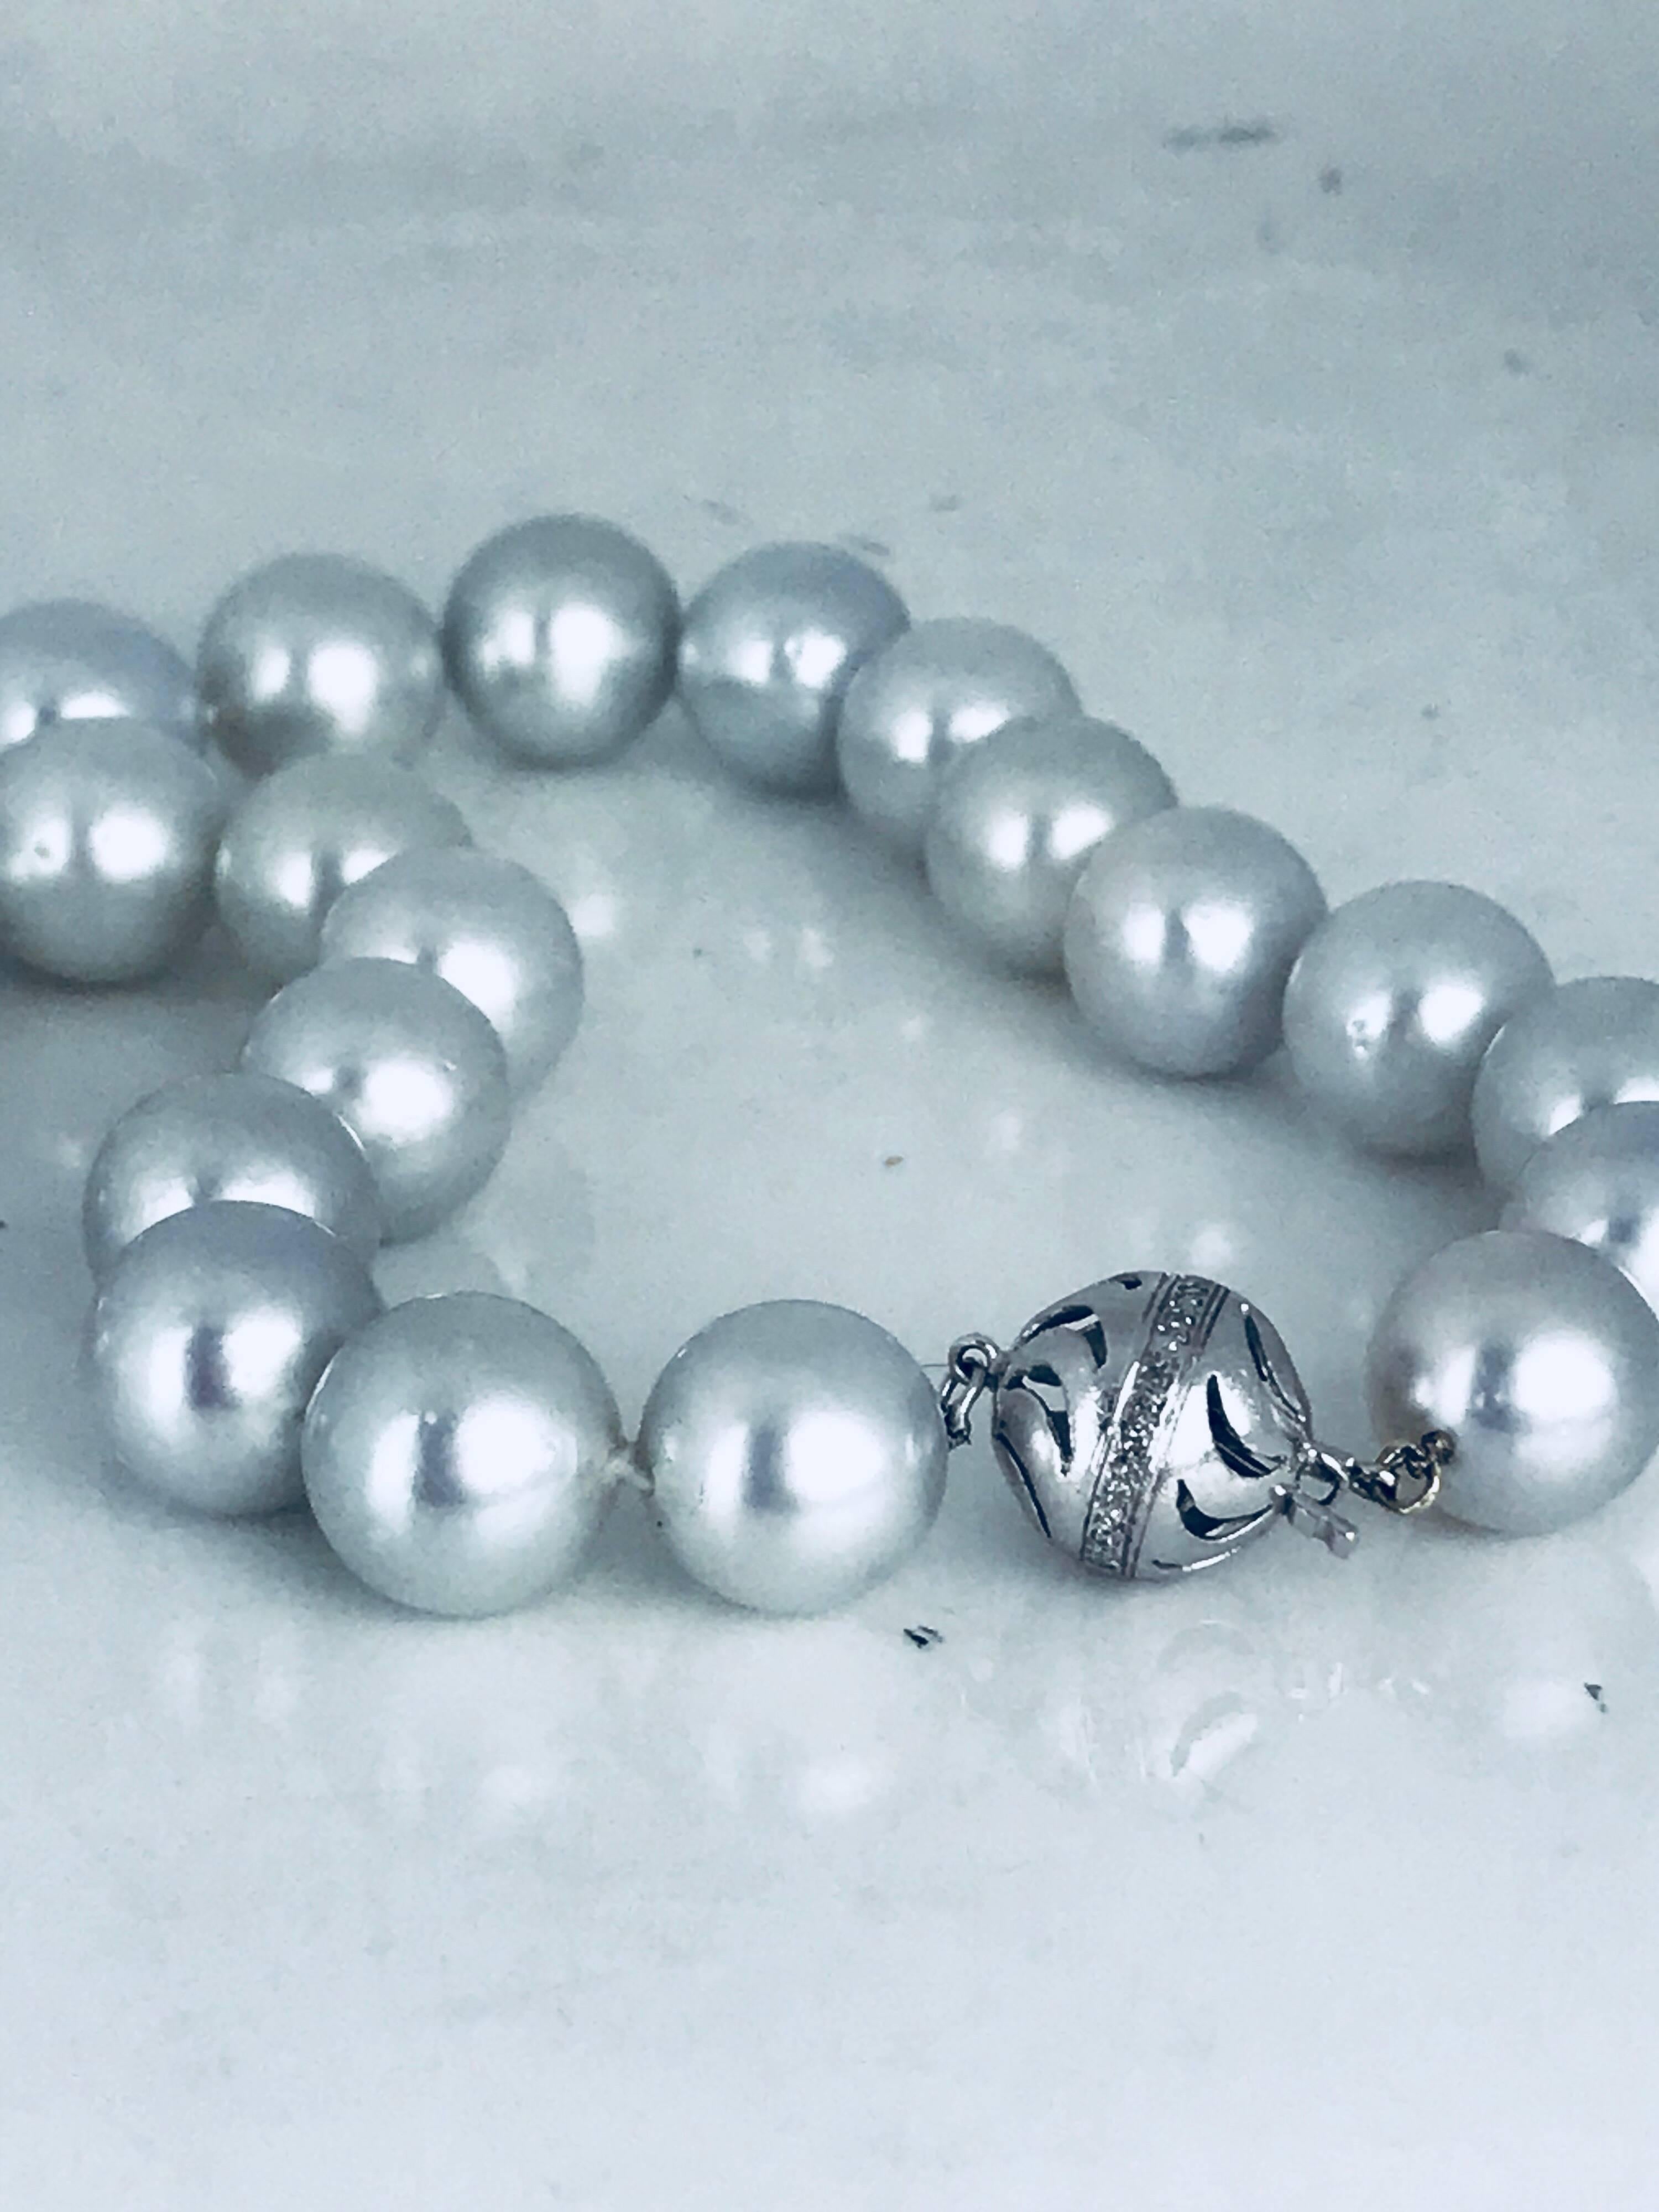 Beautiful, White South Sea Pearl strand with a total of 31 pearls. The pearls are graduated with the largest measuring 14.40 millimeters. 

The smallest pearl is 12.12 millimeters and the average is 13.40 mm.
This strand is a big look and the color